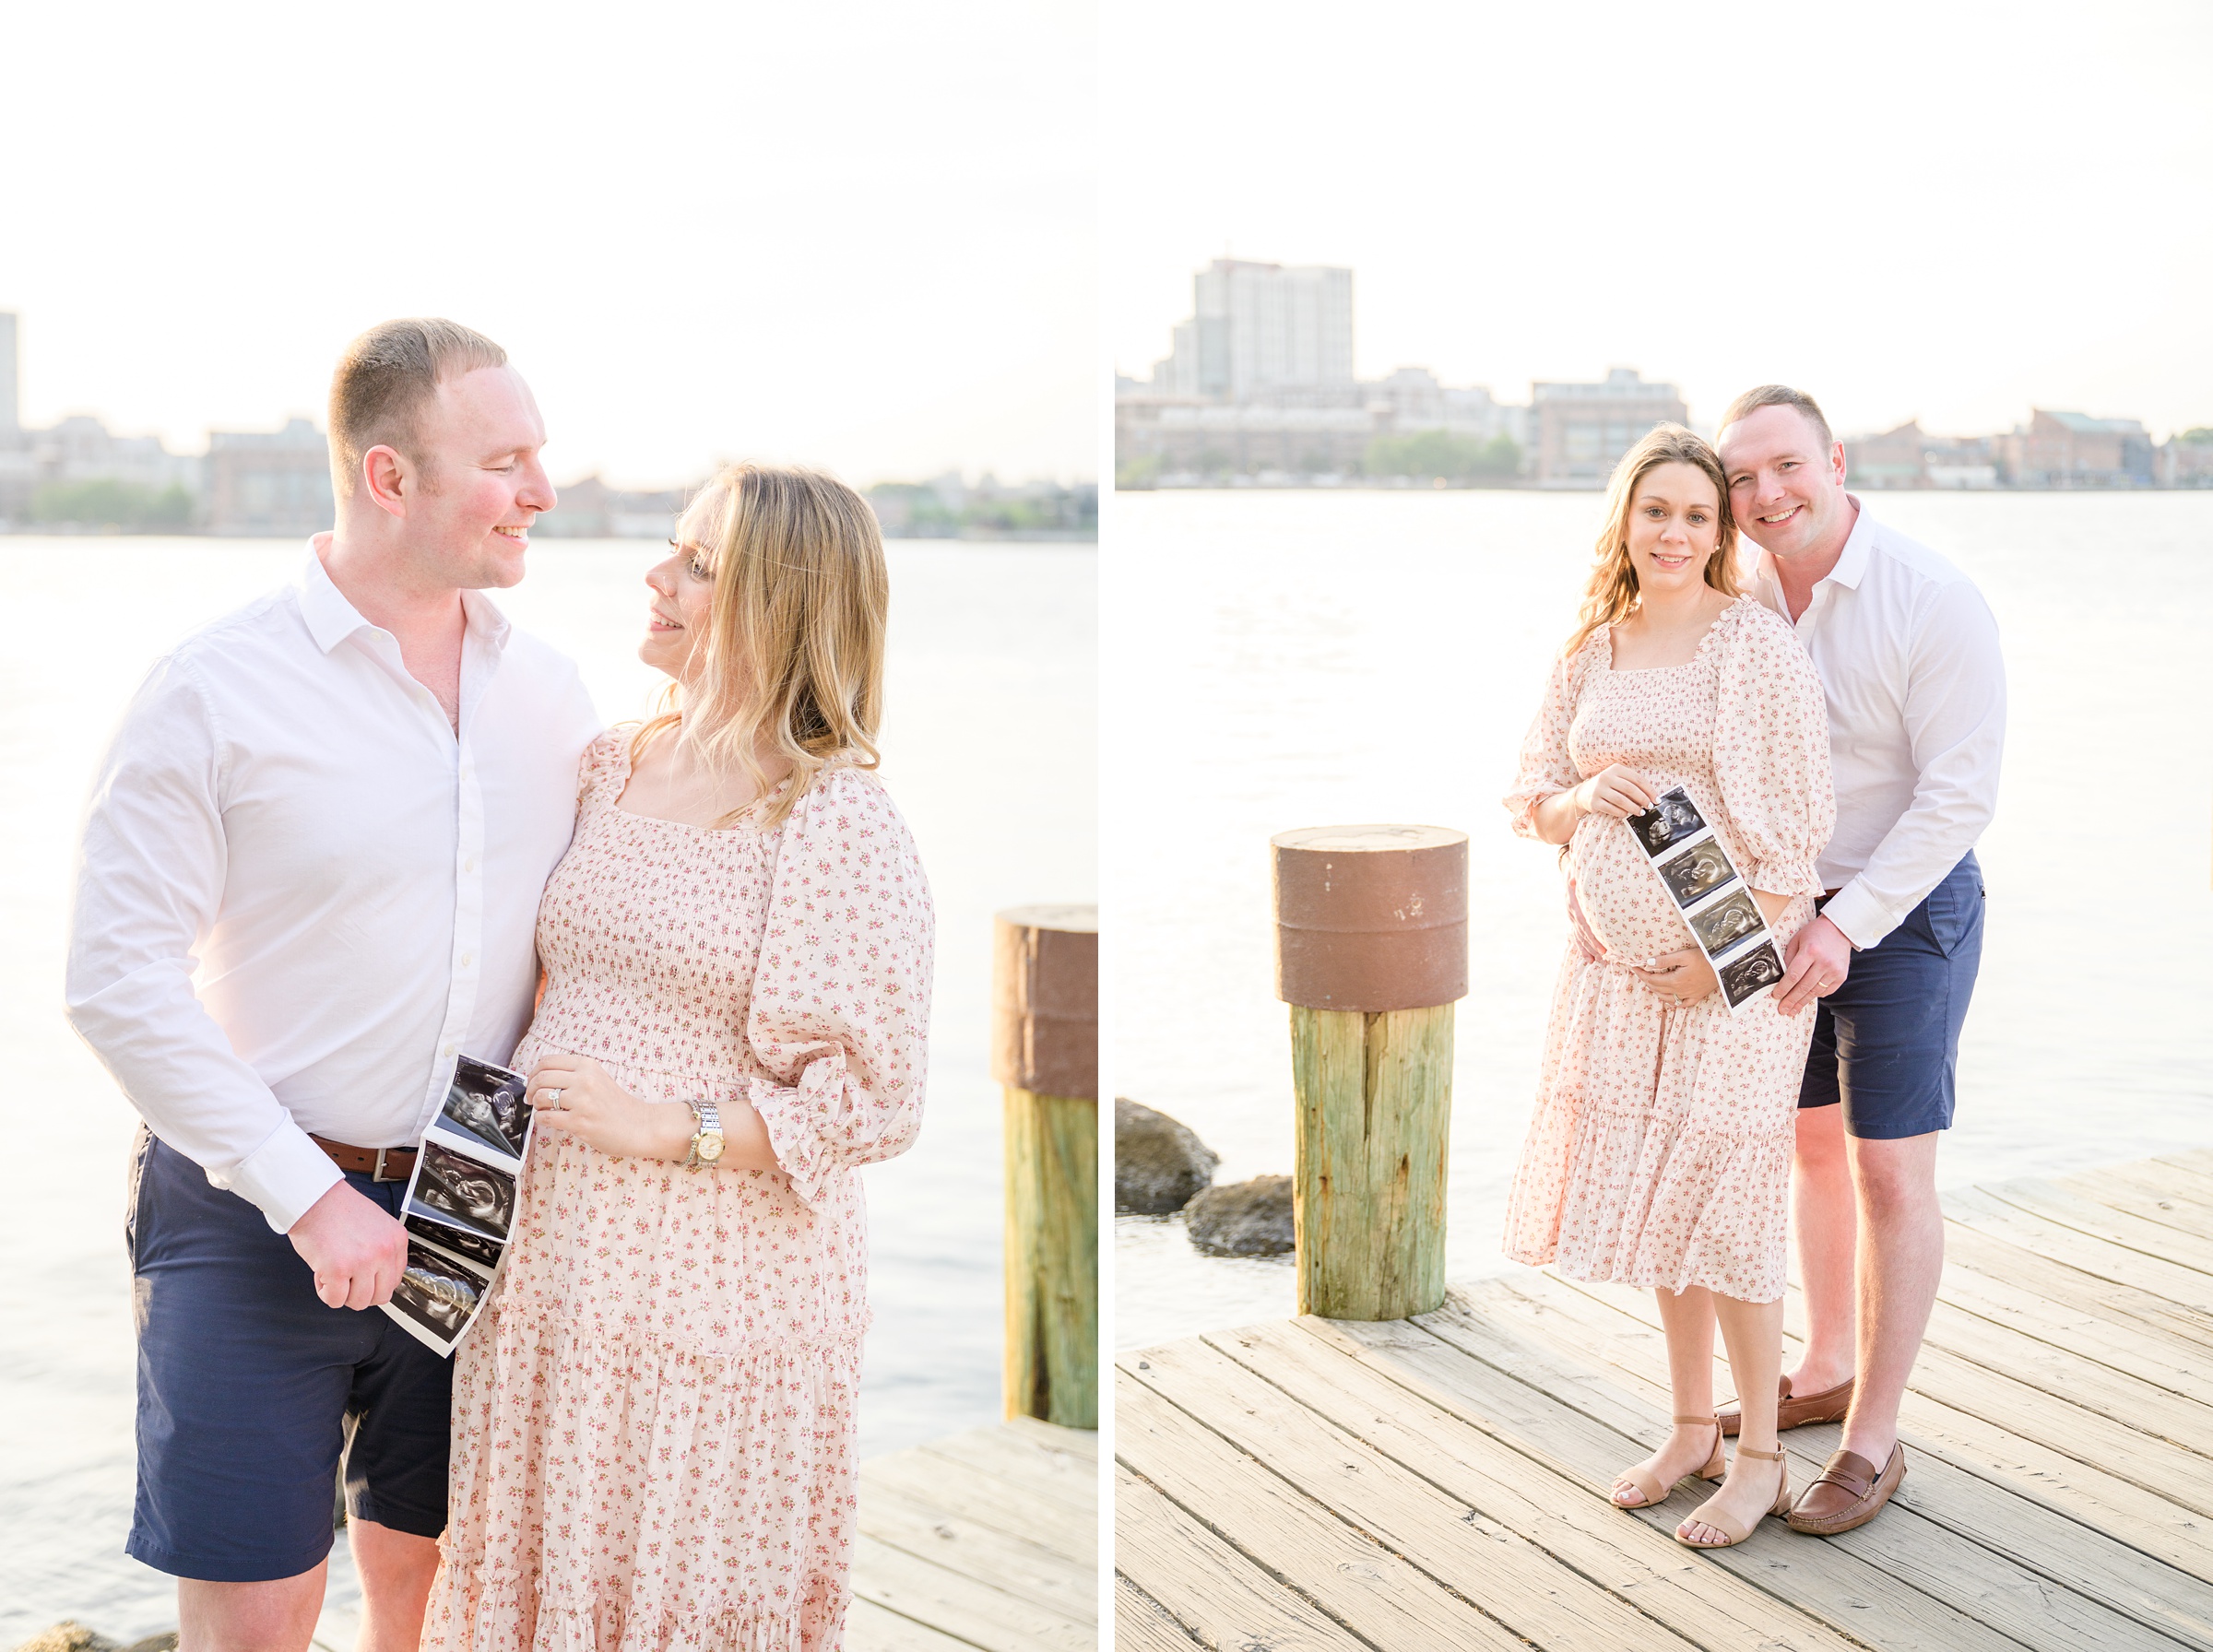 Mary and Adam's maternity photos in Locust Point in Baltimore featuring a stunning golden hour by Baltimore Photographer Cait Kramer Photography